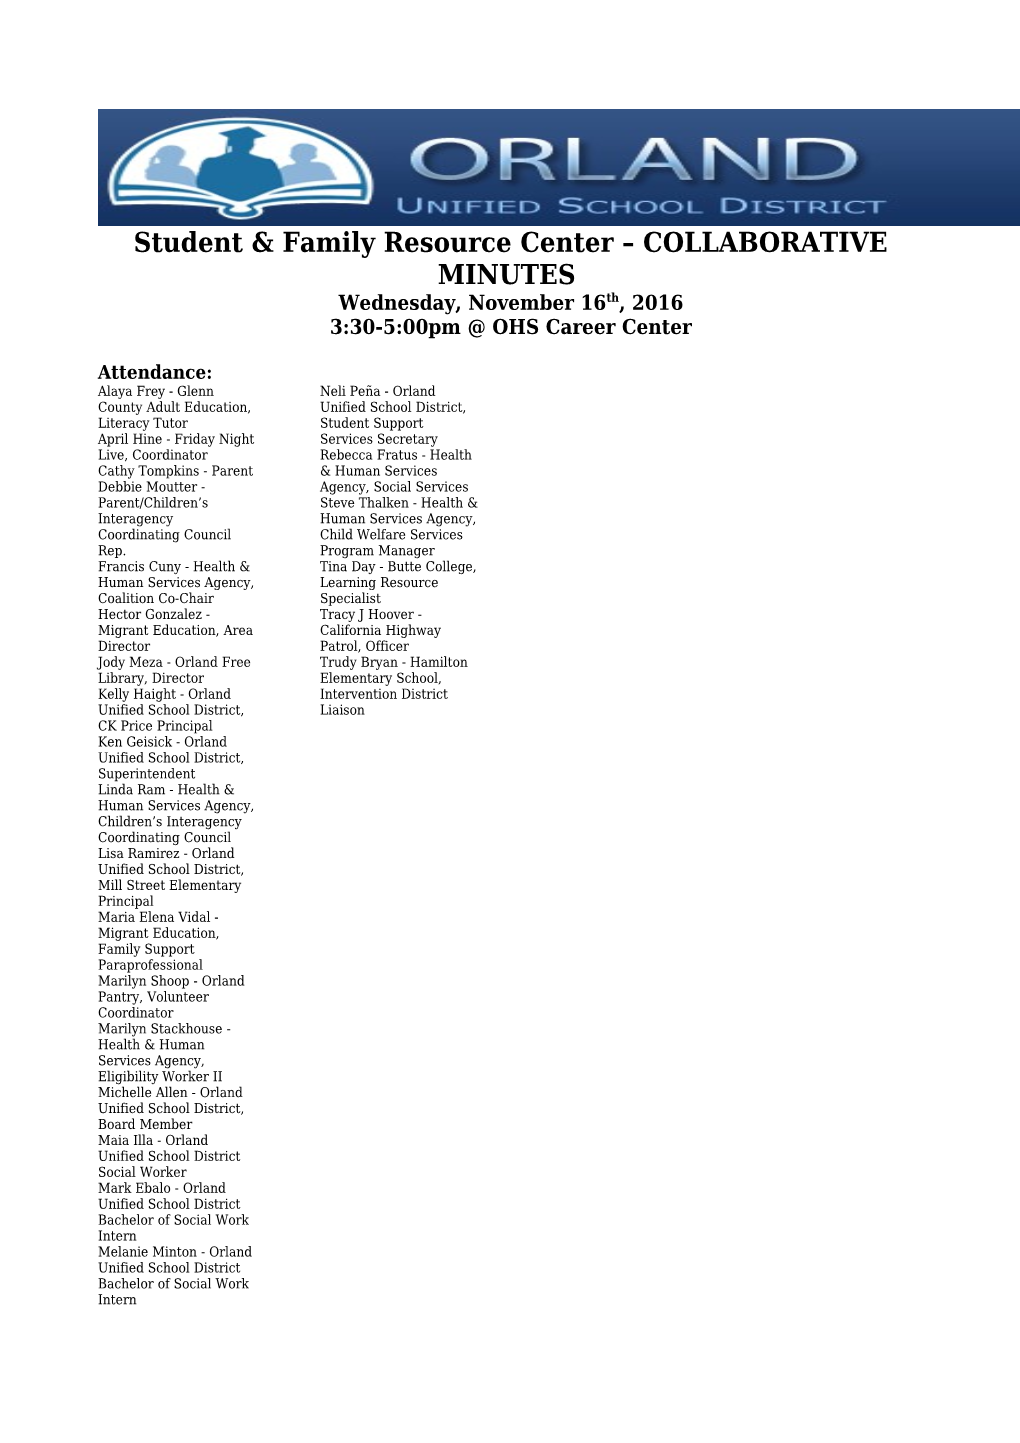 Student & Family Resource Center COLLABORATIVE MINUTES